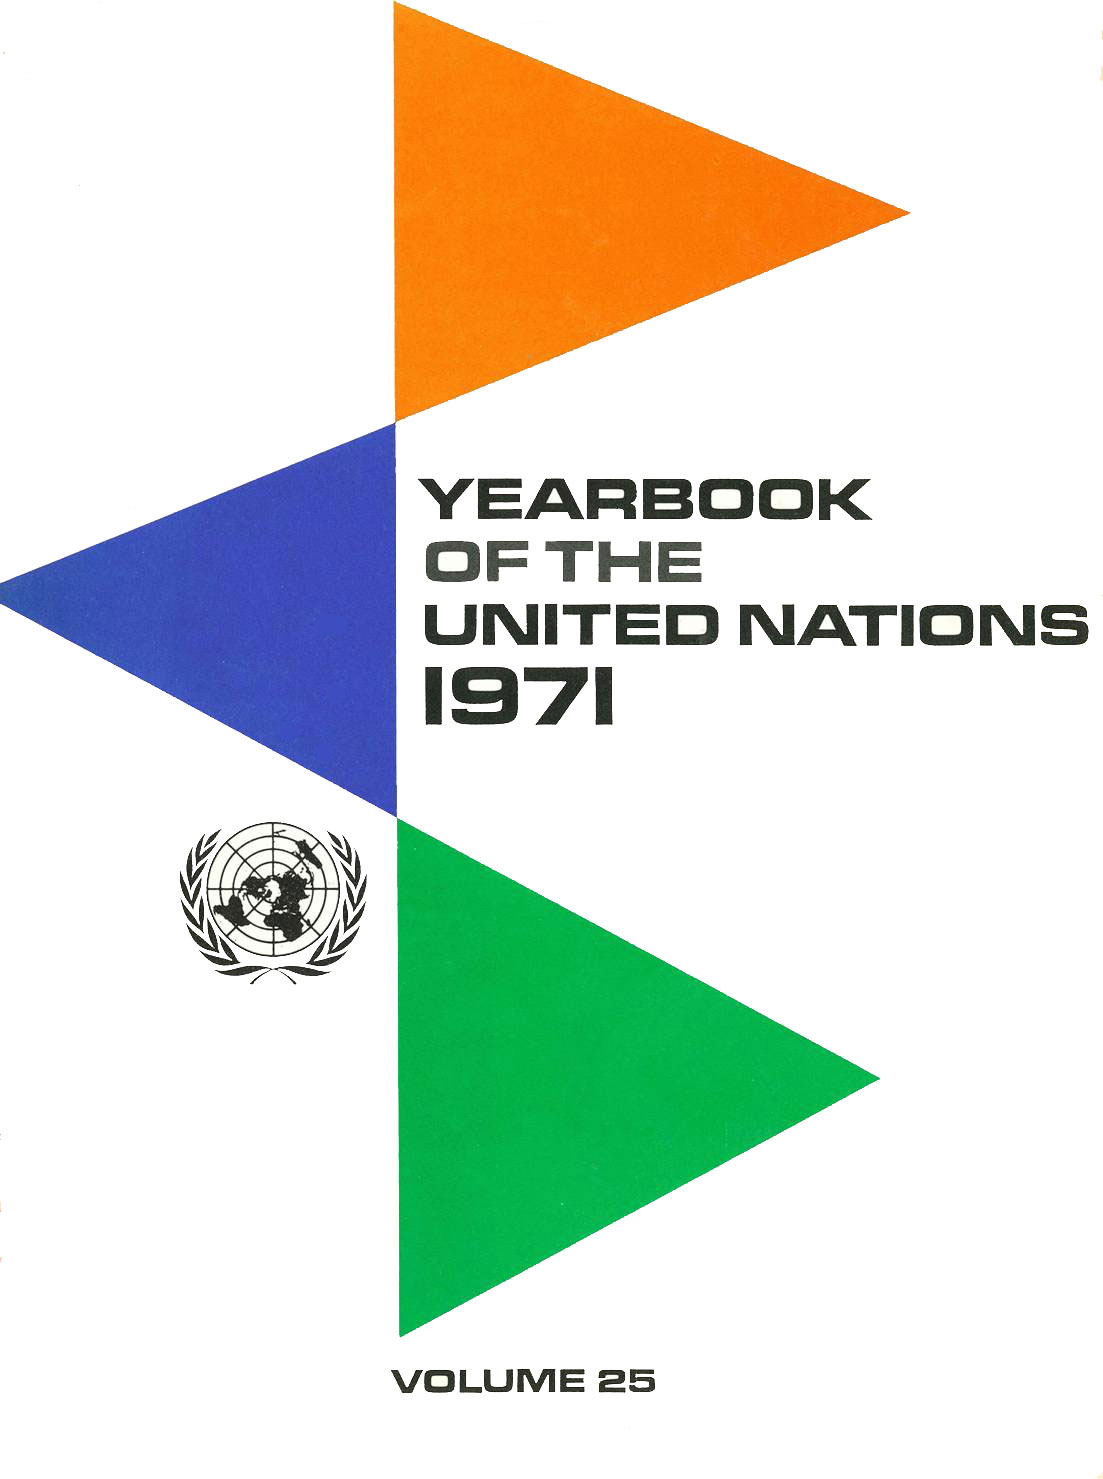 image of Yearbook of the United Nations 1971